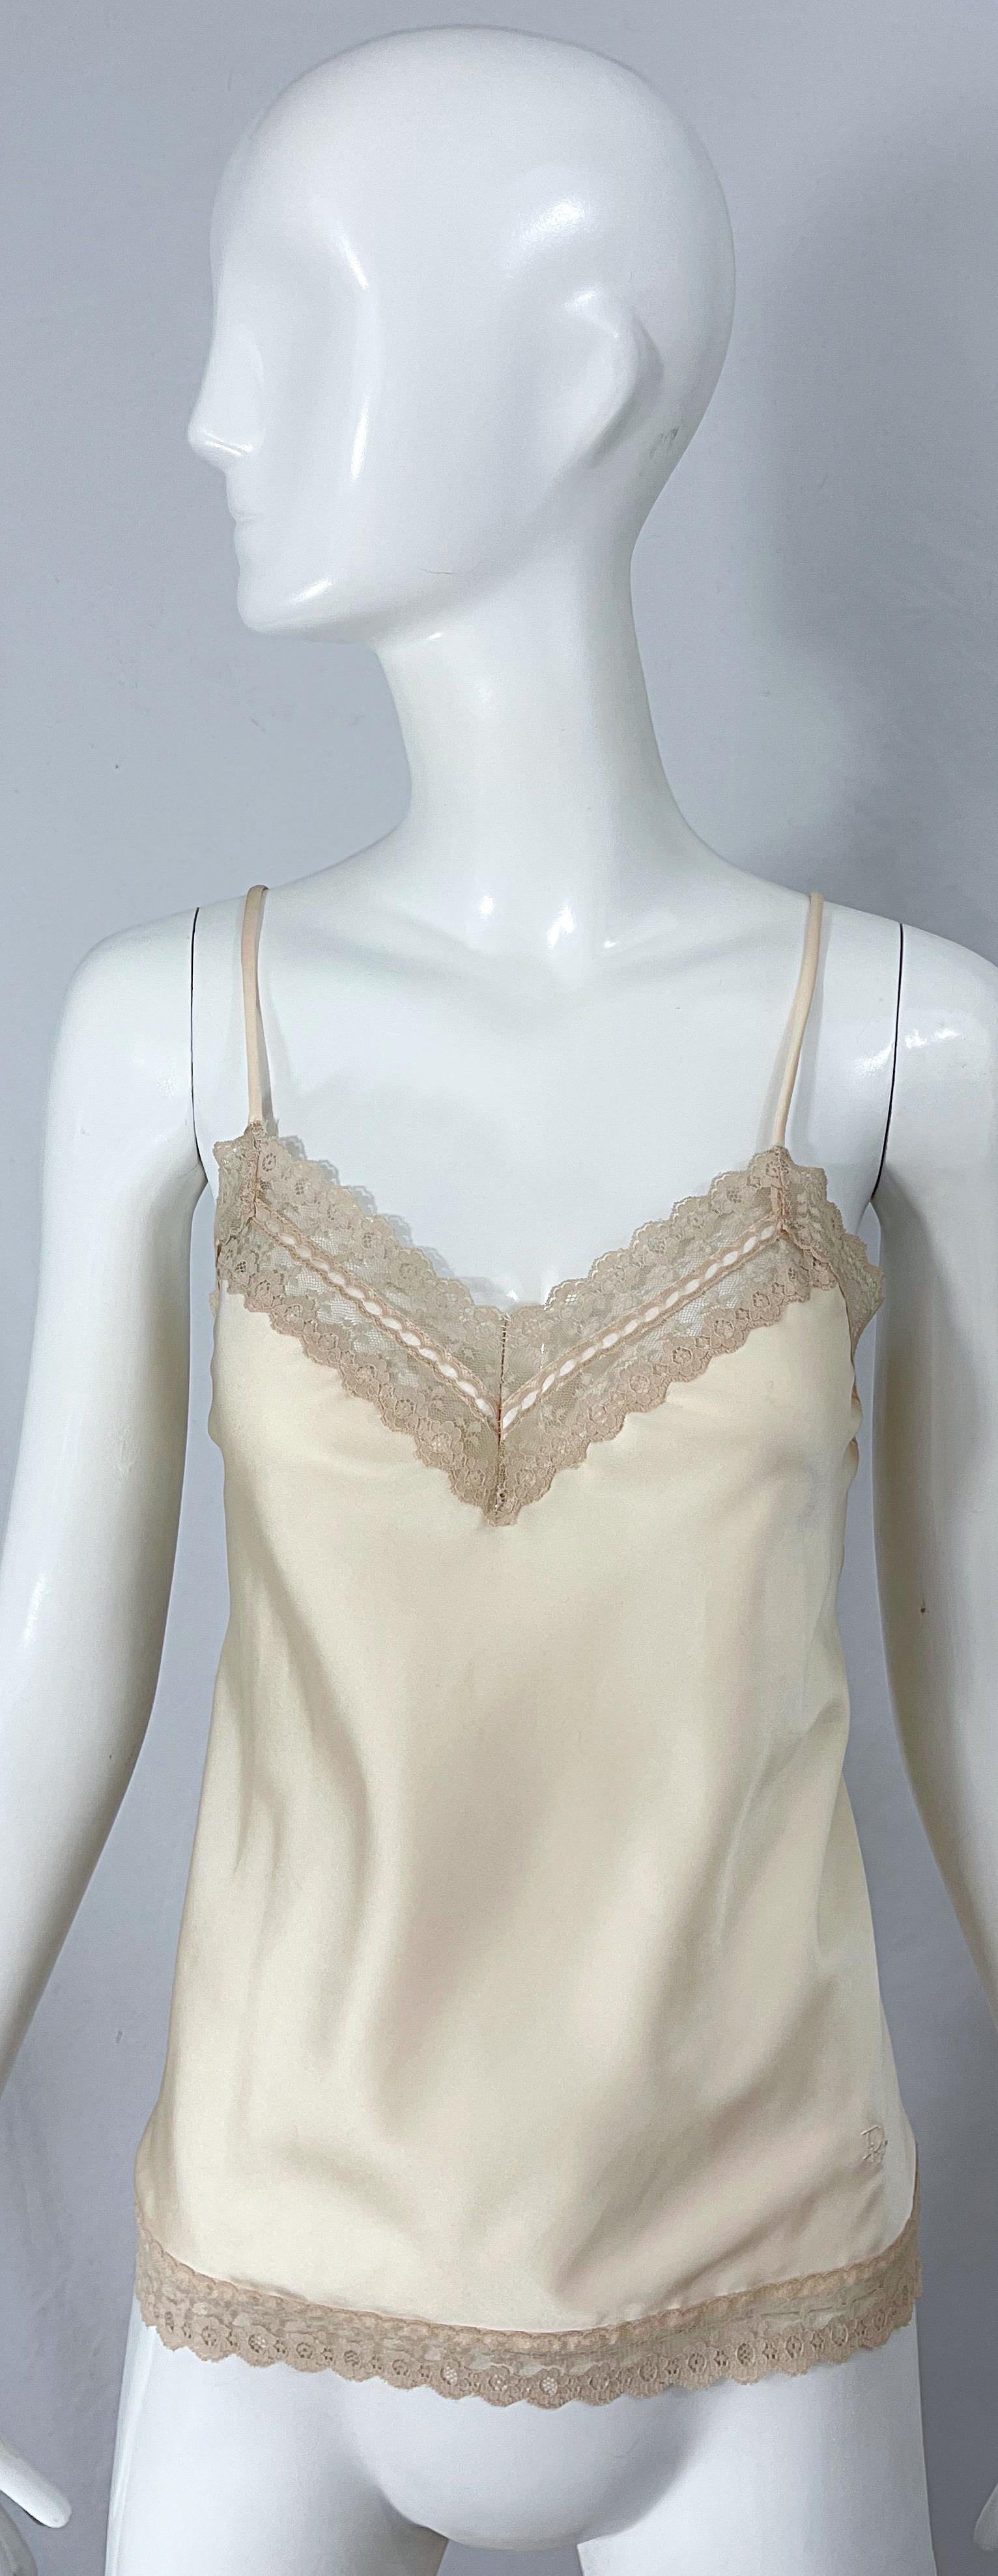 NWT 1980s Christian Dior Ivory Satin Lace Three Piece Cami 80s Lingerie ...